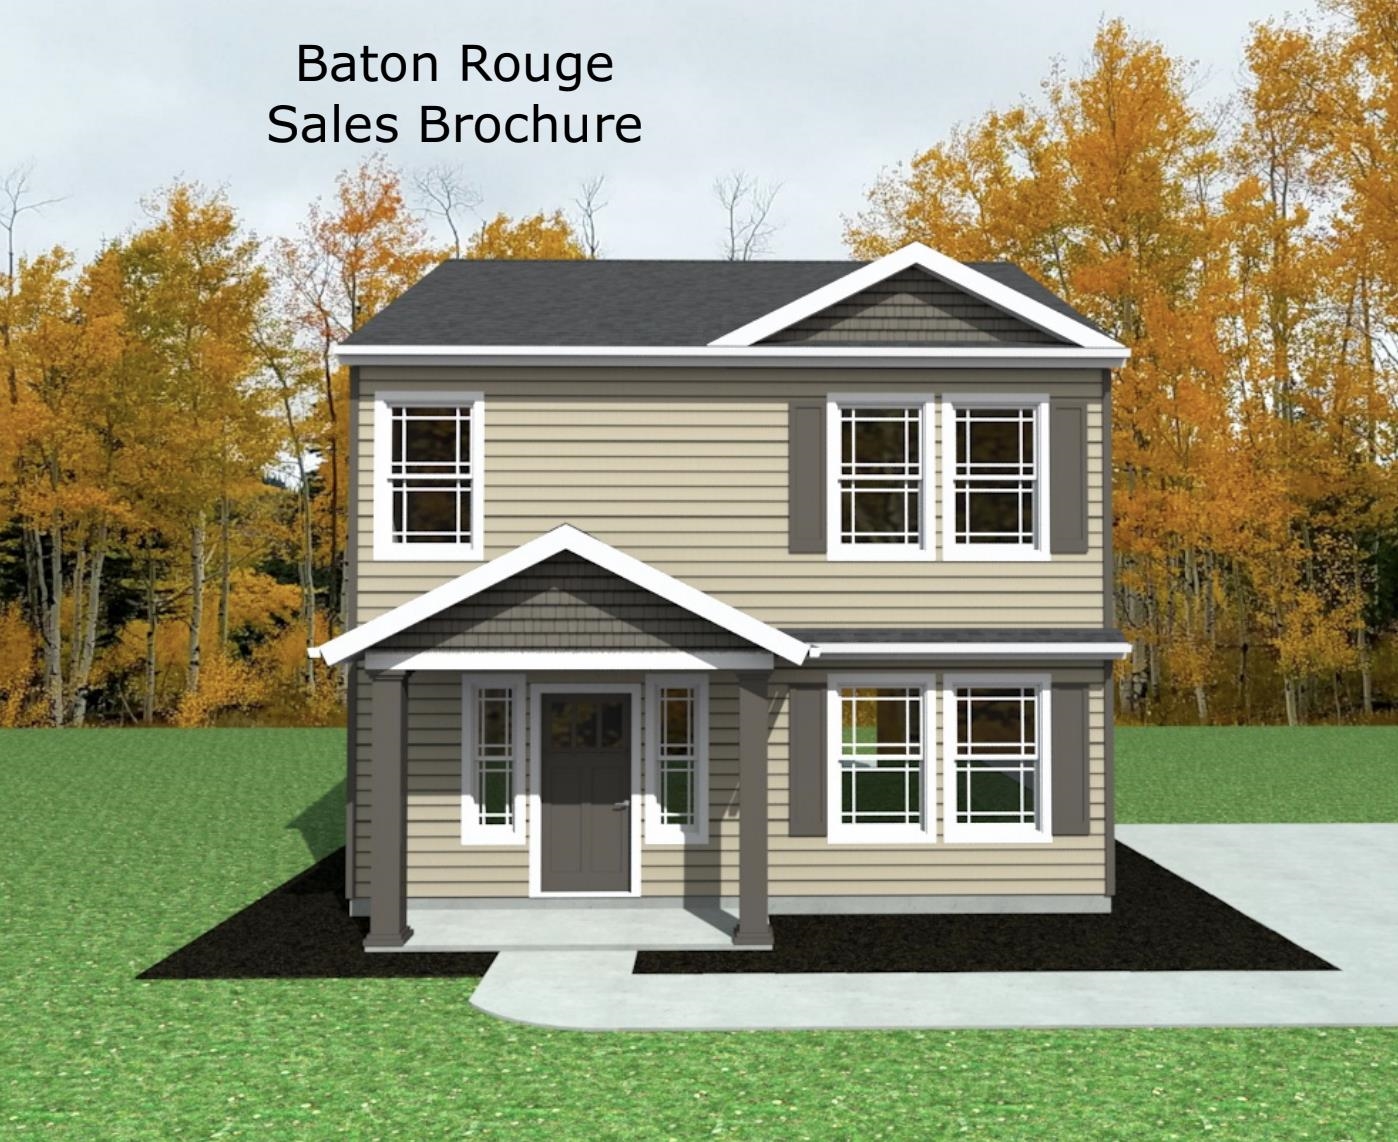 The Baton Rouge two story plan features 3 bedrooms and 2 1/2 bathrooms. The spacious living area is open into the kitchen/dining area. The master bedroom features a walk-in closet and full bathroom. 30-year architectural shingles, site built construction, and a "2-10" warranty are included to give you peace of mind. Lot 20. Preferred Lender/Attorney Closing Costs Incentive Offered!